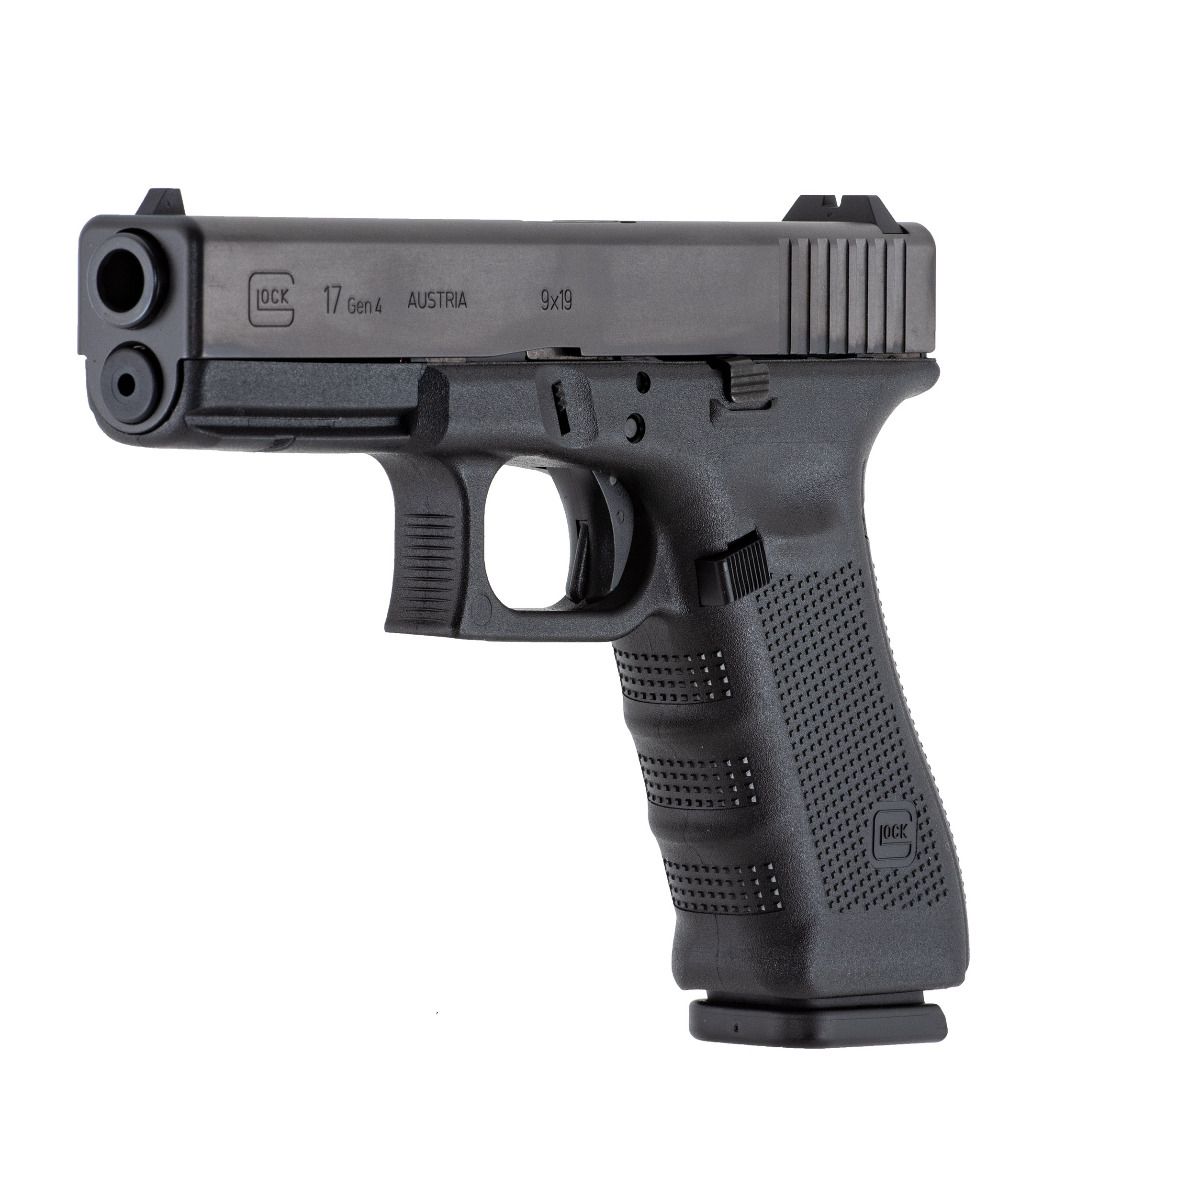 Glock 17 Gen 4 9 mm Improvements •Reversible Magazine Catch •Textured  backstrap options. •Improved guide rod and spring. •Magazine improvements  Specifications: •Caliber: 9mm •Action: Safe (D.A.O.) •Length (Slide): 6.85  •Length between Sights: 5.98 •B